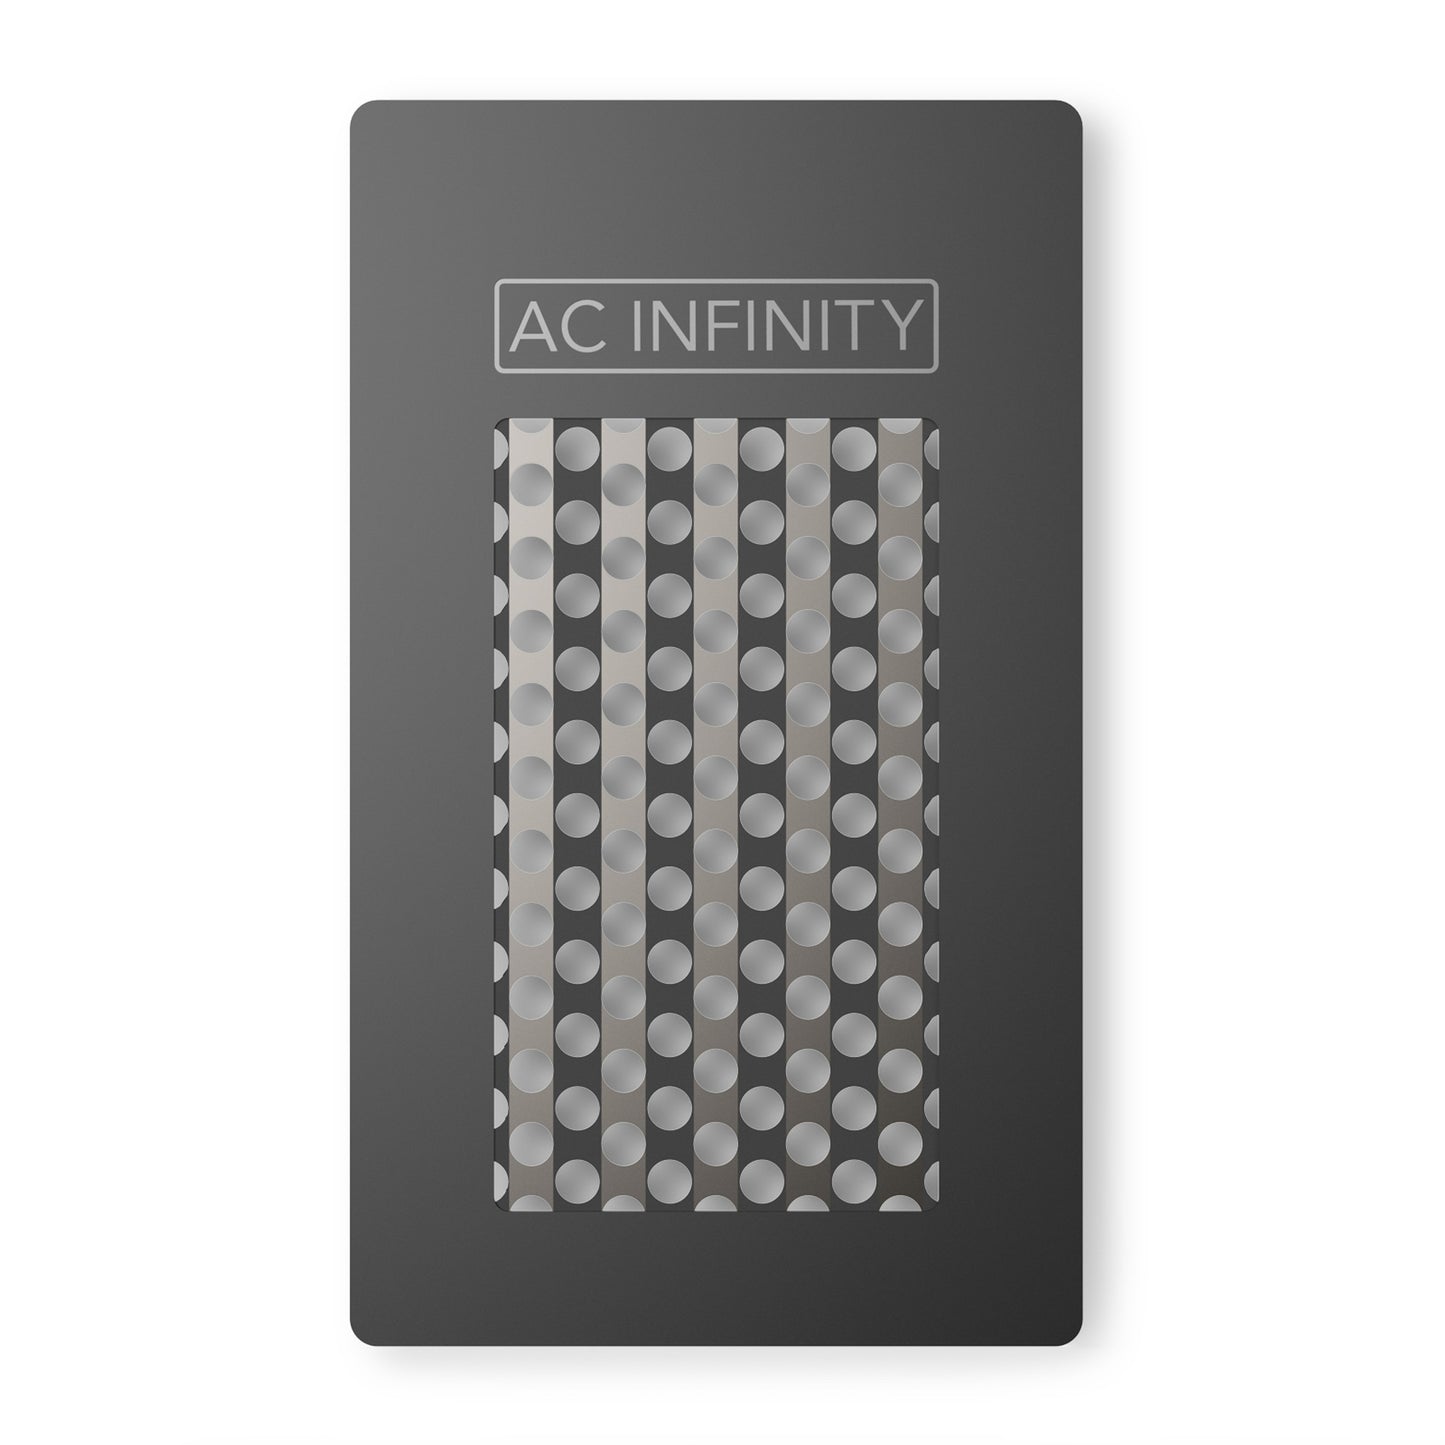 AC Infinity Grinder Card (Milling Tool W/ Protective Sleeve)